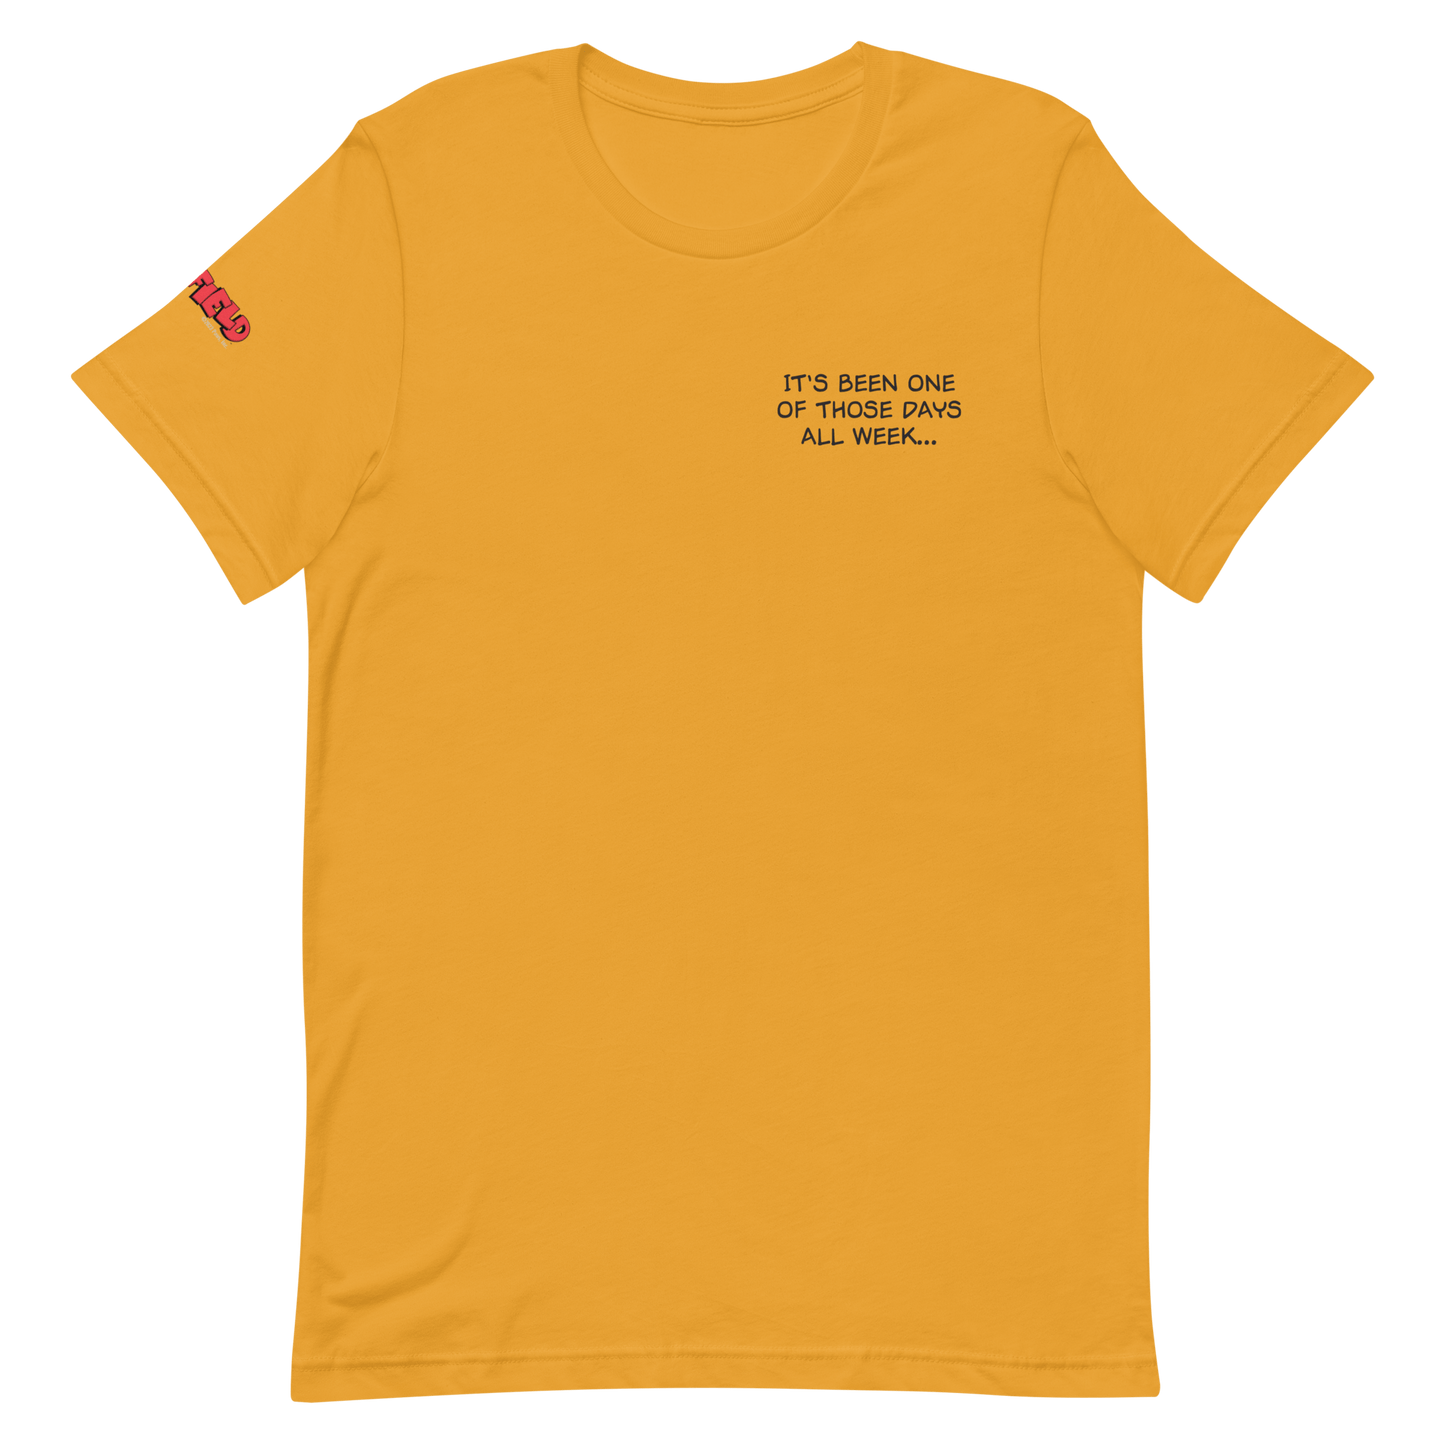 Garfield One Of Those Days Adult Short Sleeve T - Shirt - Paramount Shop